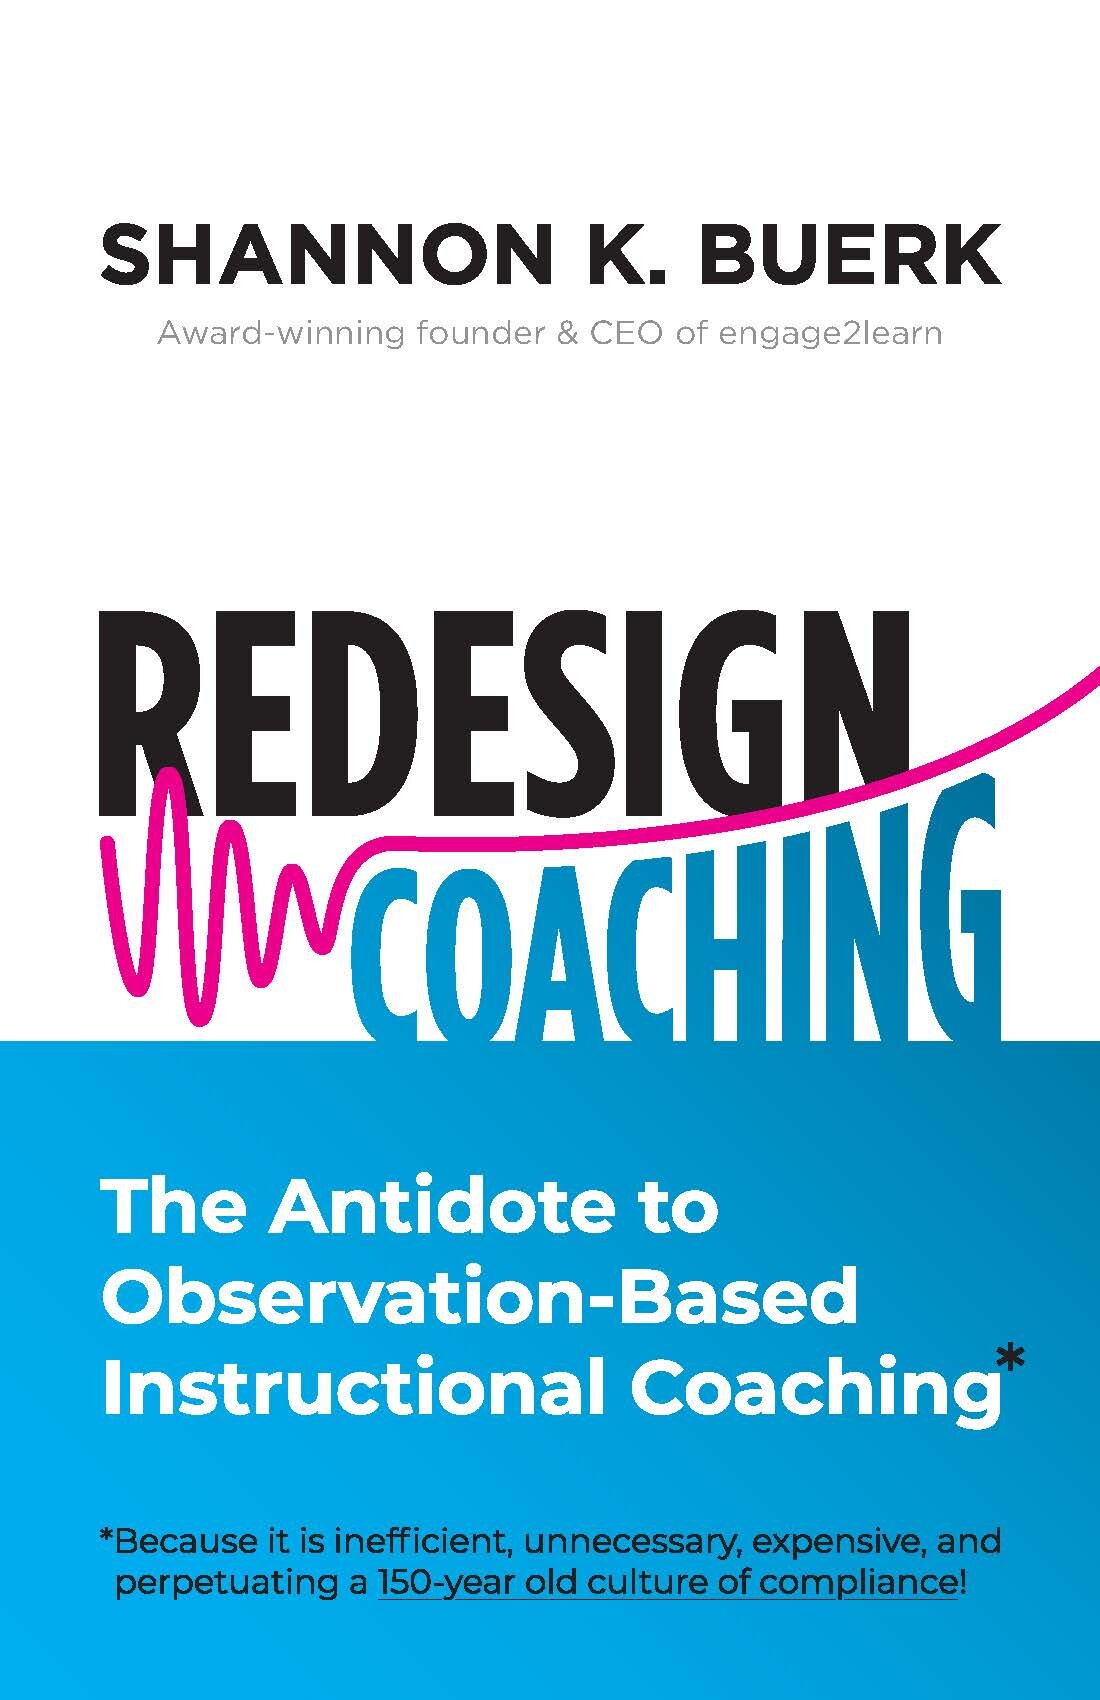 Redesign Coaching Book Cover-Observation-Based Coaching Proof.jpg